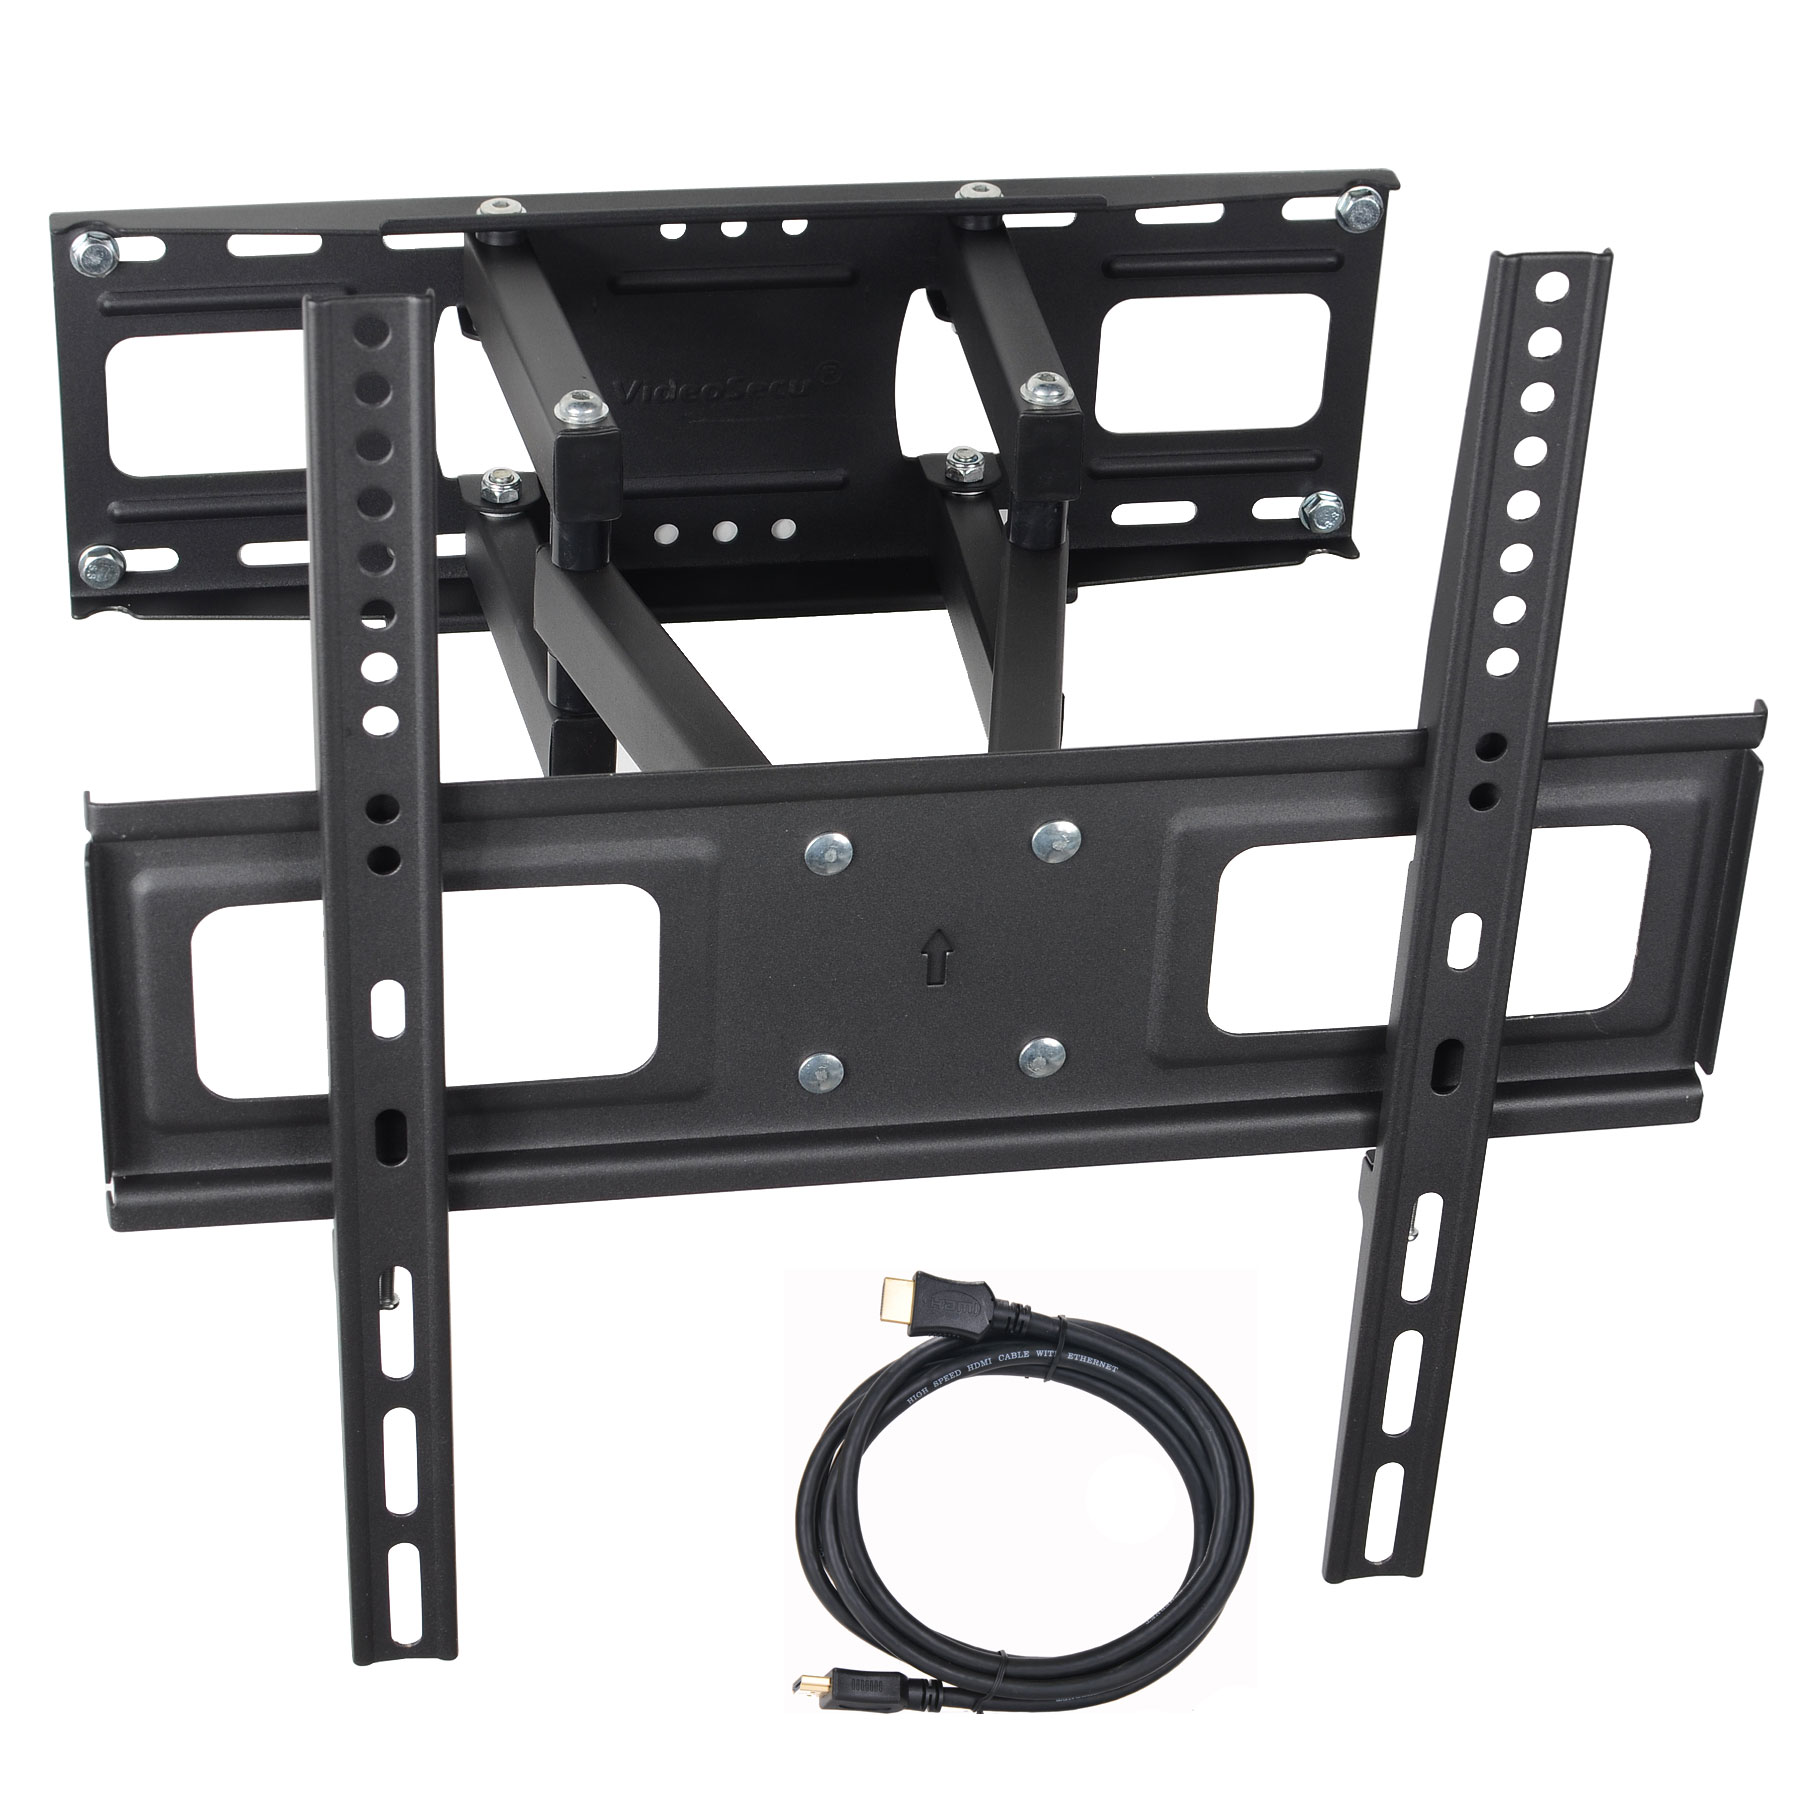 VideoSecu Articulating TV Wall Mount Tilt Swivel Dual Arms Bracket for Most 27 32 39 42 43 46 47 48 50 55 inch LED LCD Plasma HDTV Flat Panel Screen Display, with Full Motion Extend VESA 400x400mm bxk - image 1 of 6